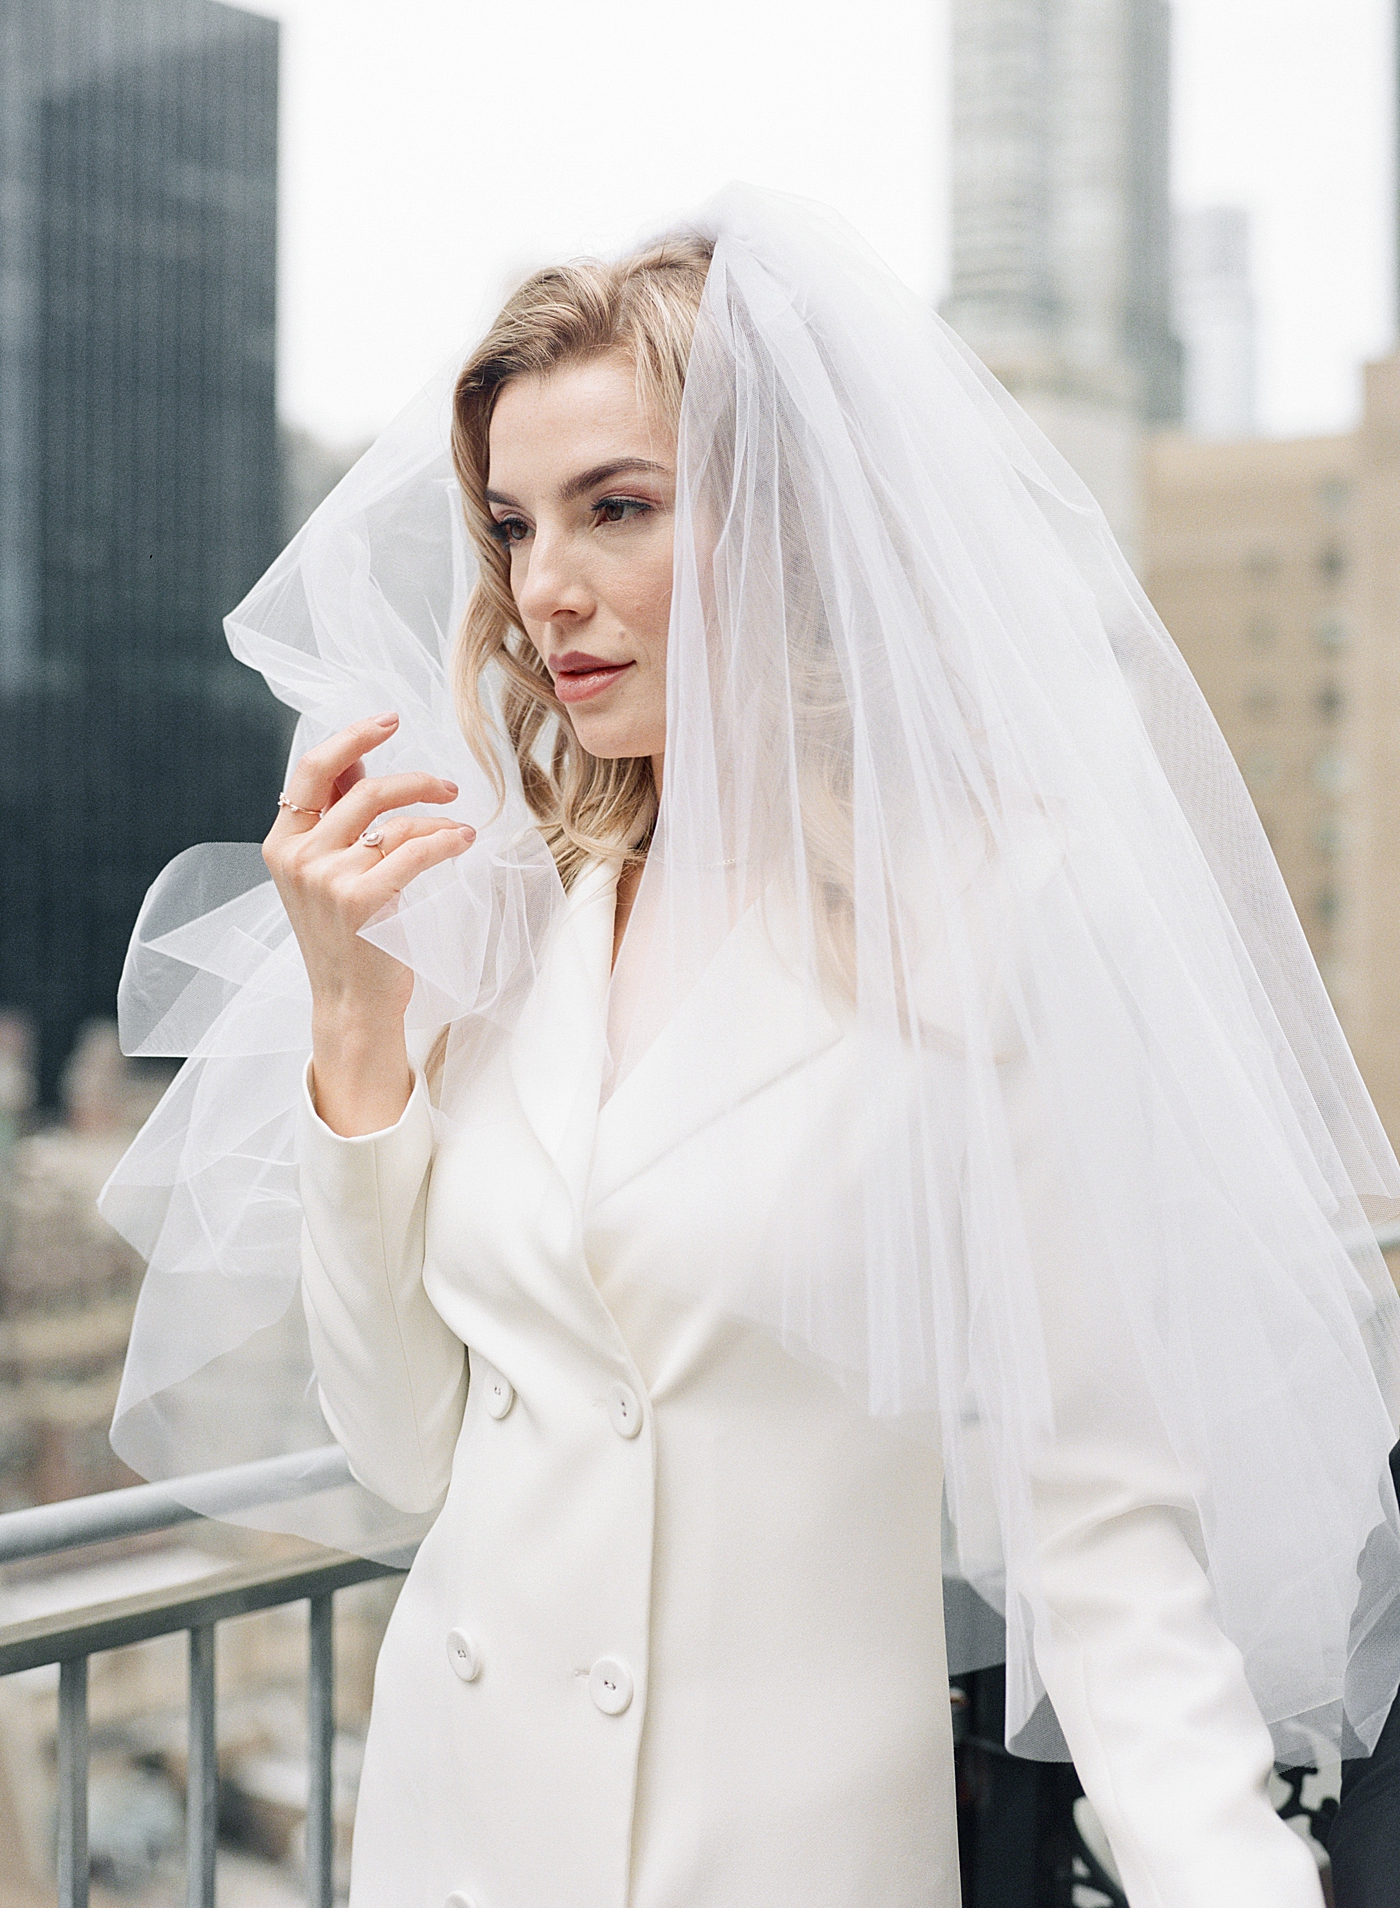 Bride with a white veil | Photo by Hope Helmuth Photography